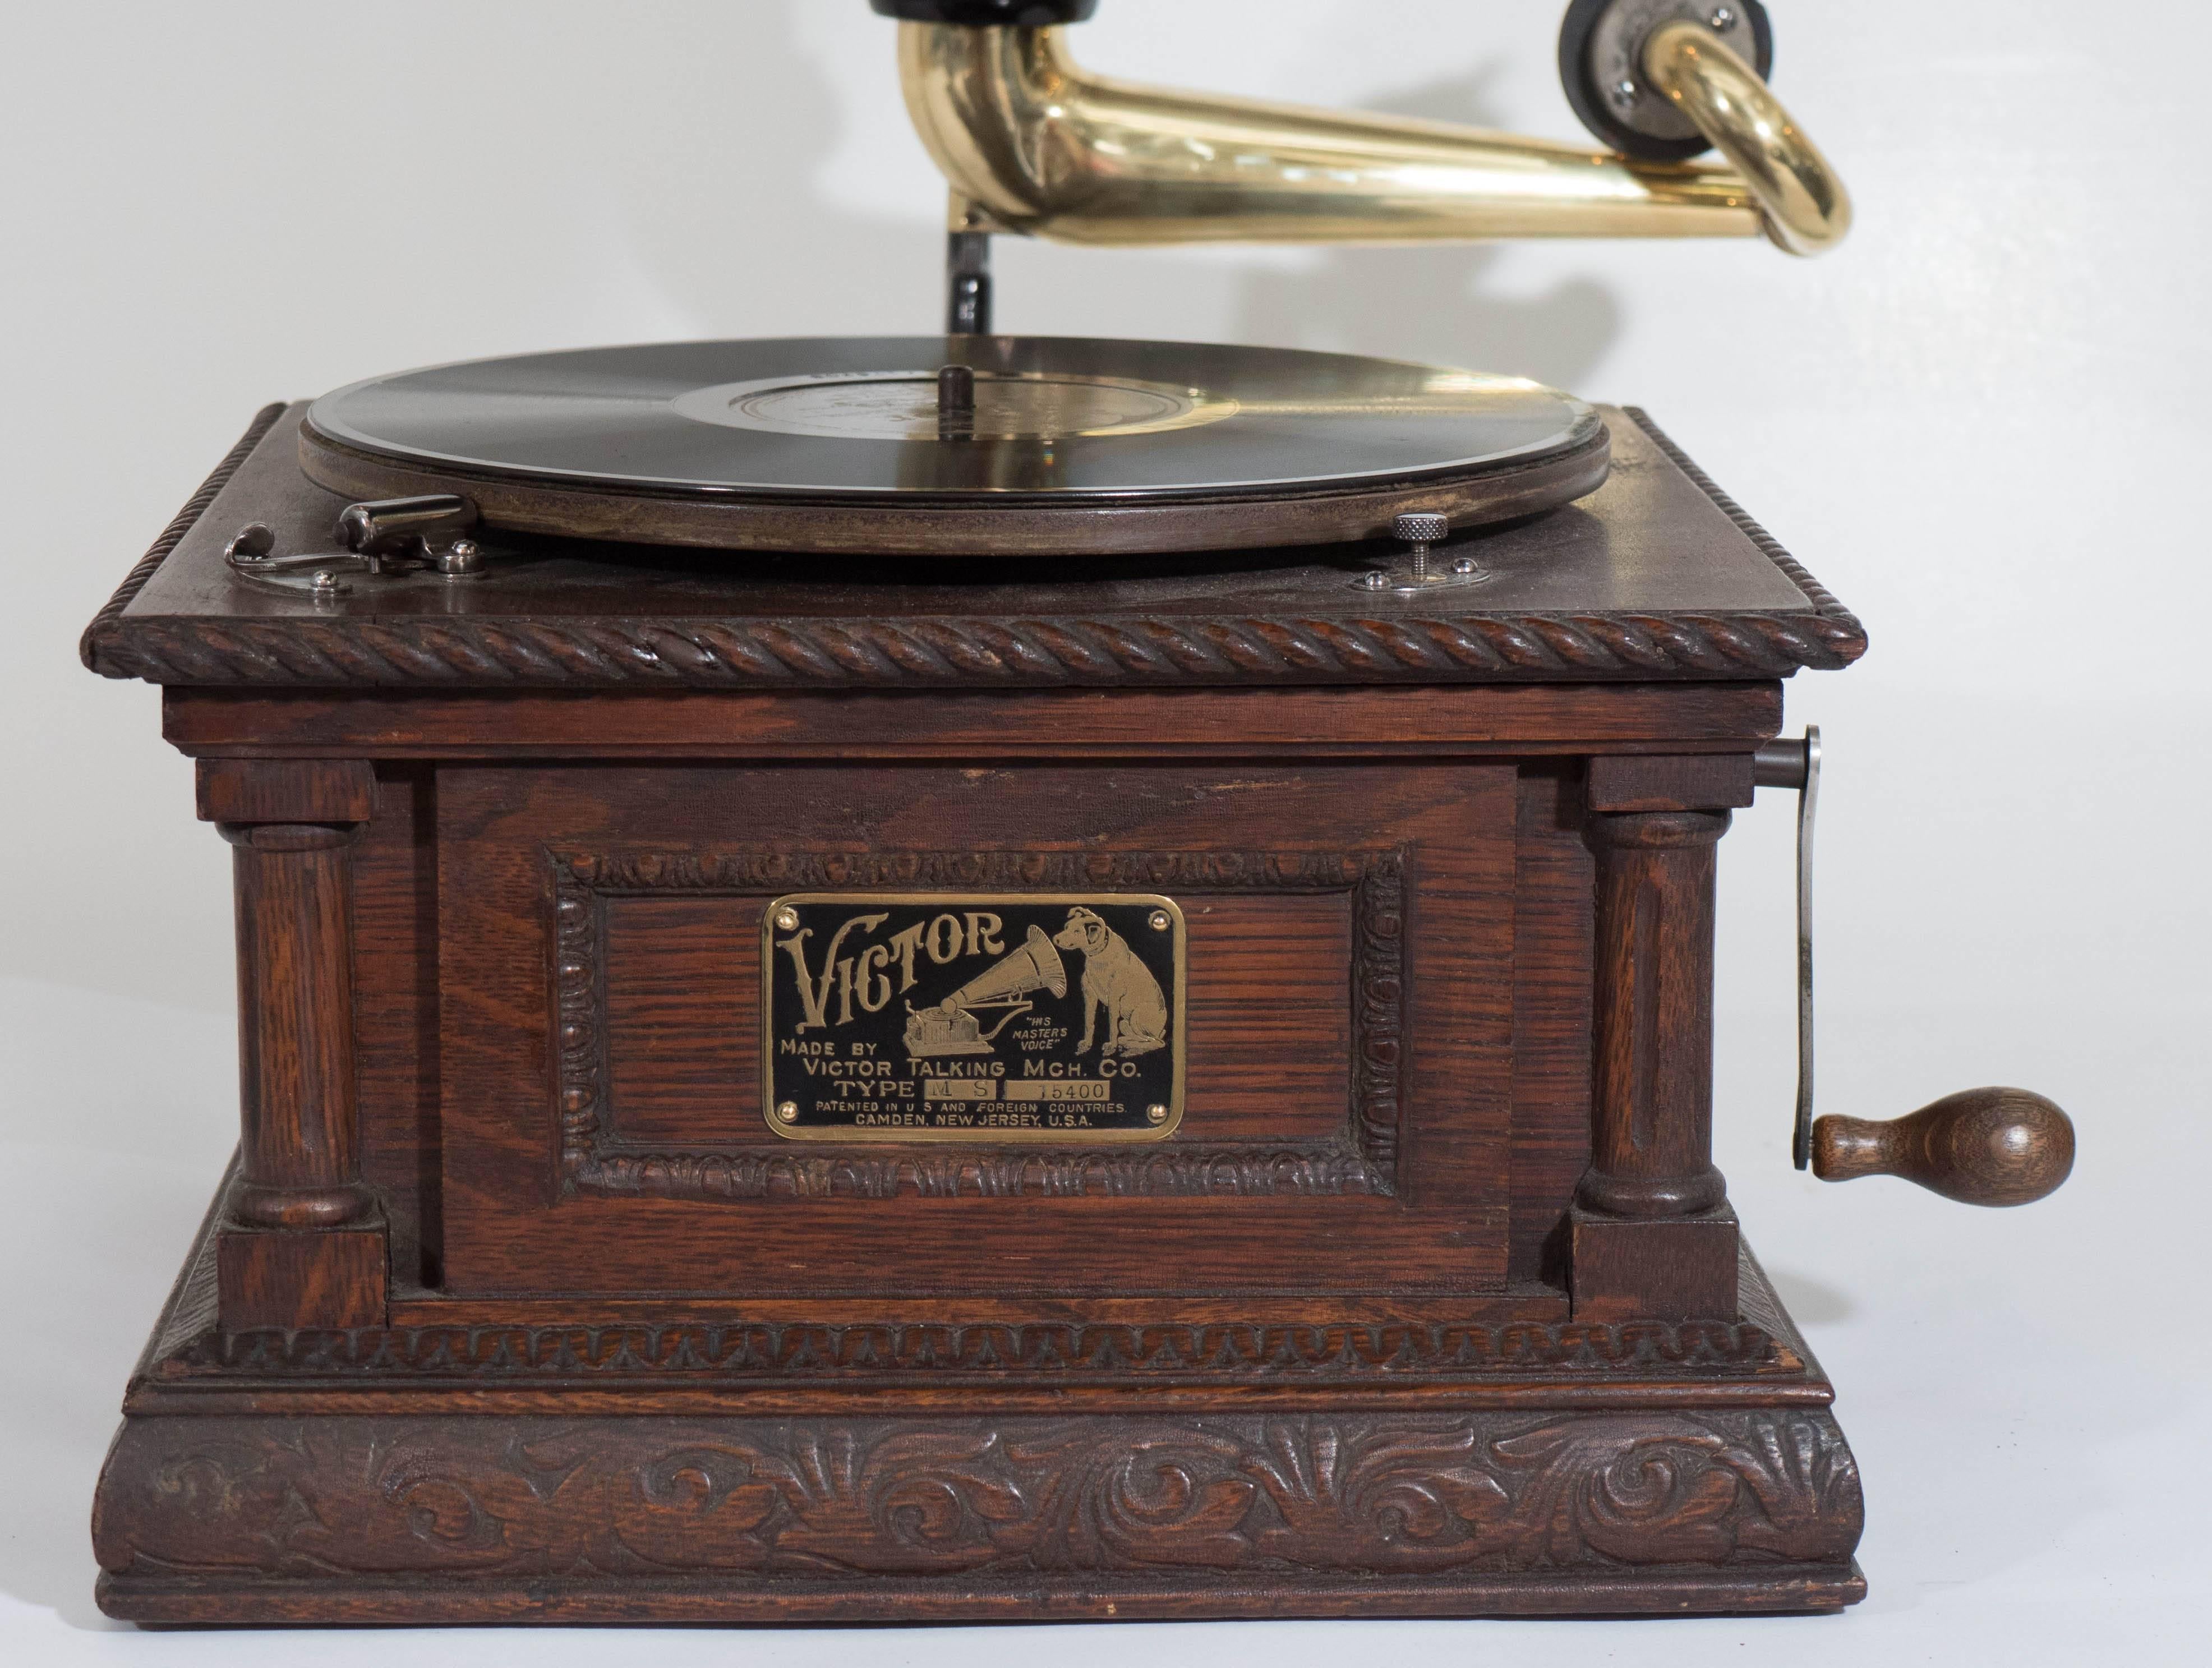 An early 20th century phonograph, produced by The Victor Talking Machine Company of Camden, New Jersey, circa 1904-1905. The 'Monarch Special' model is distinguished by the ornately carved oak base, the most highly decorated phonograph from this